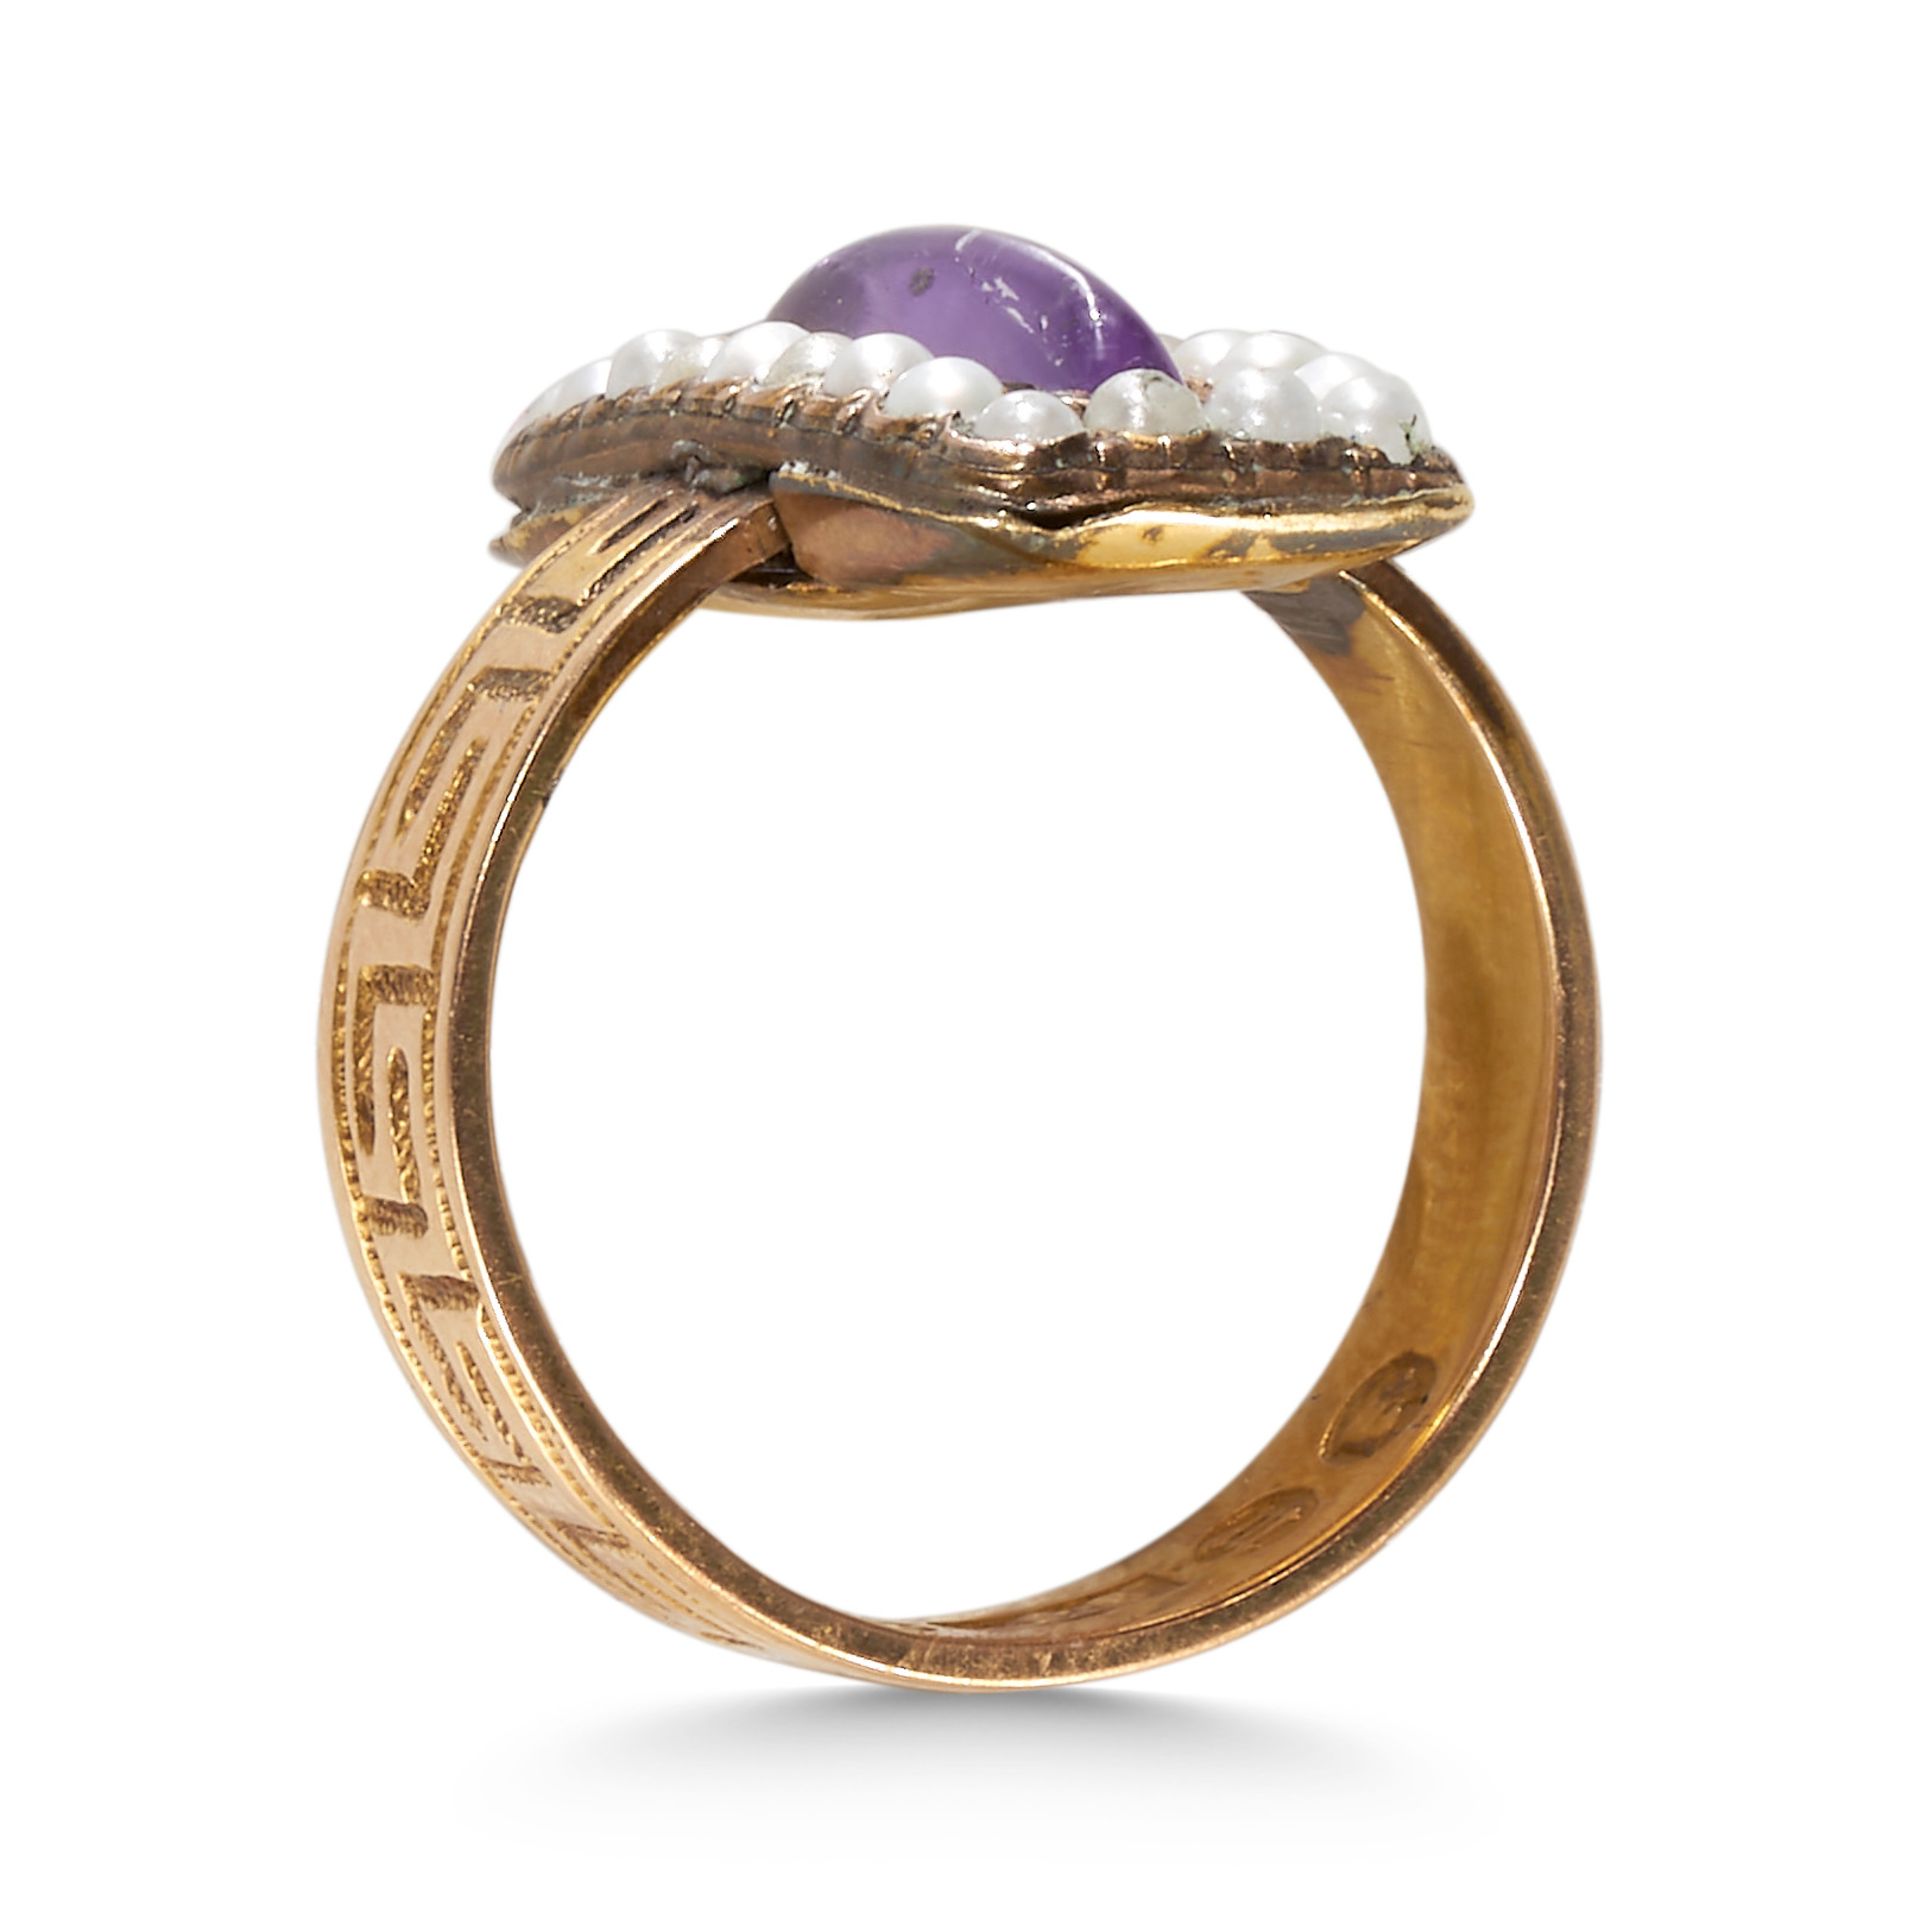 AN ANTIQUE AMETHYST AND PEARL RING. - Image 2 of 2